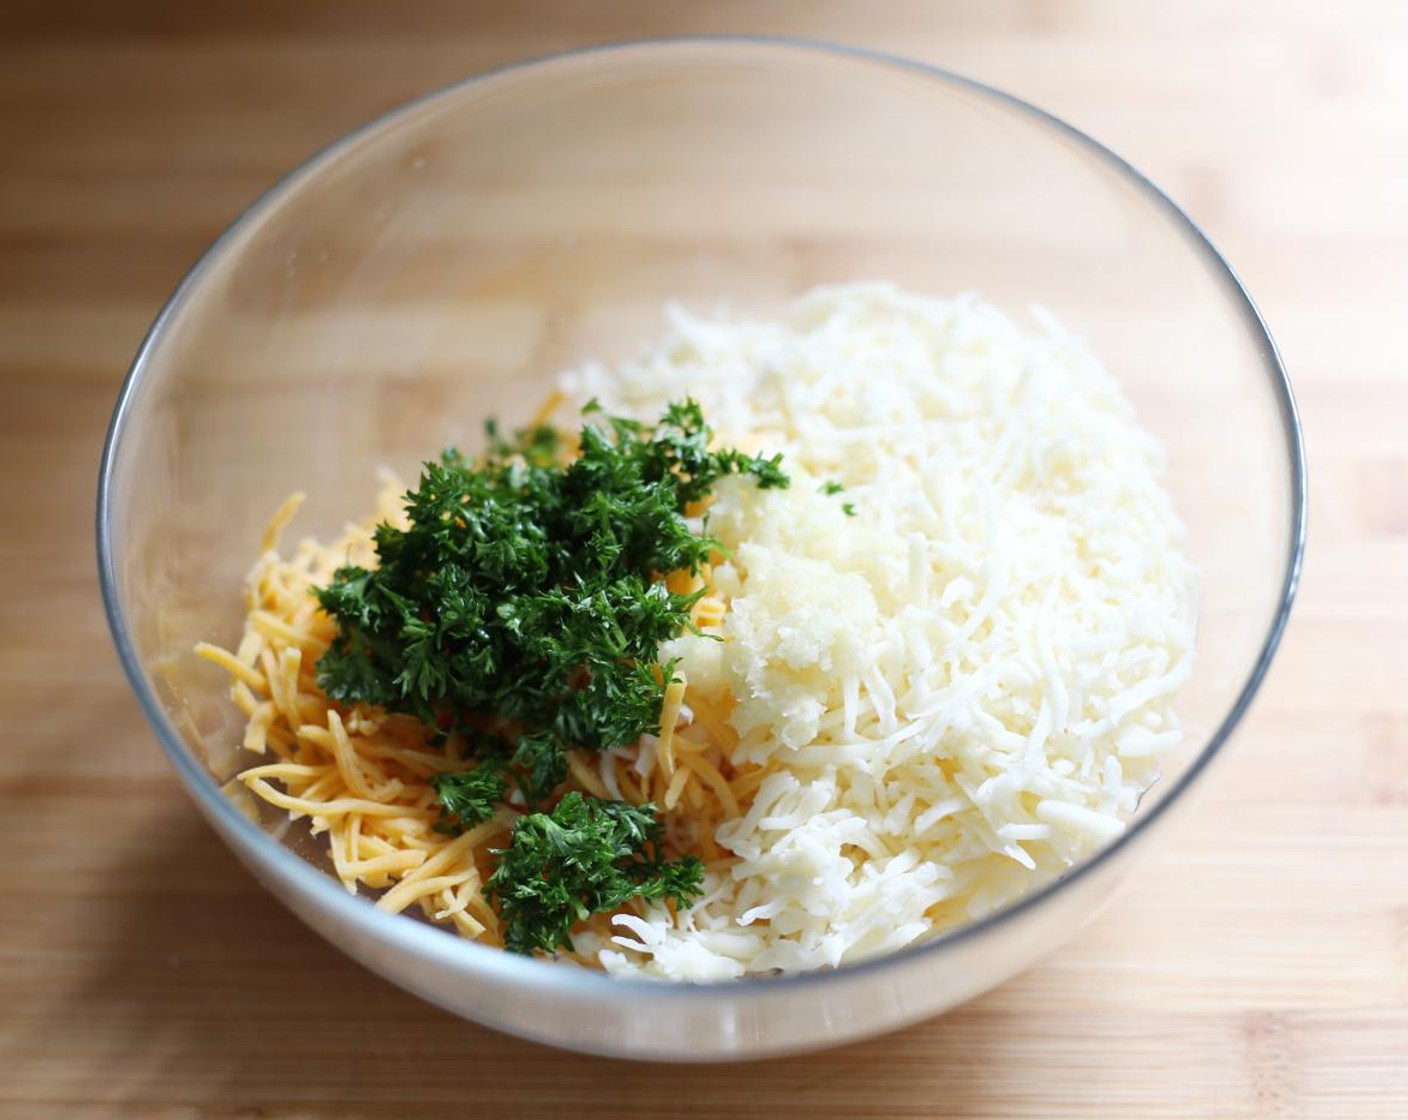 step 5 In a bowl, combine the Mozzarella Cheese (1 cup), Cheddar Cheese (1 cup), Fresh Parsley (1 Tbsp), and Garlic (1 clove).